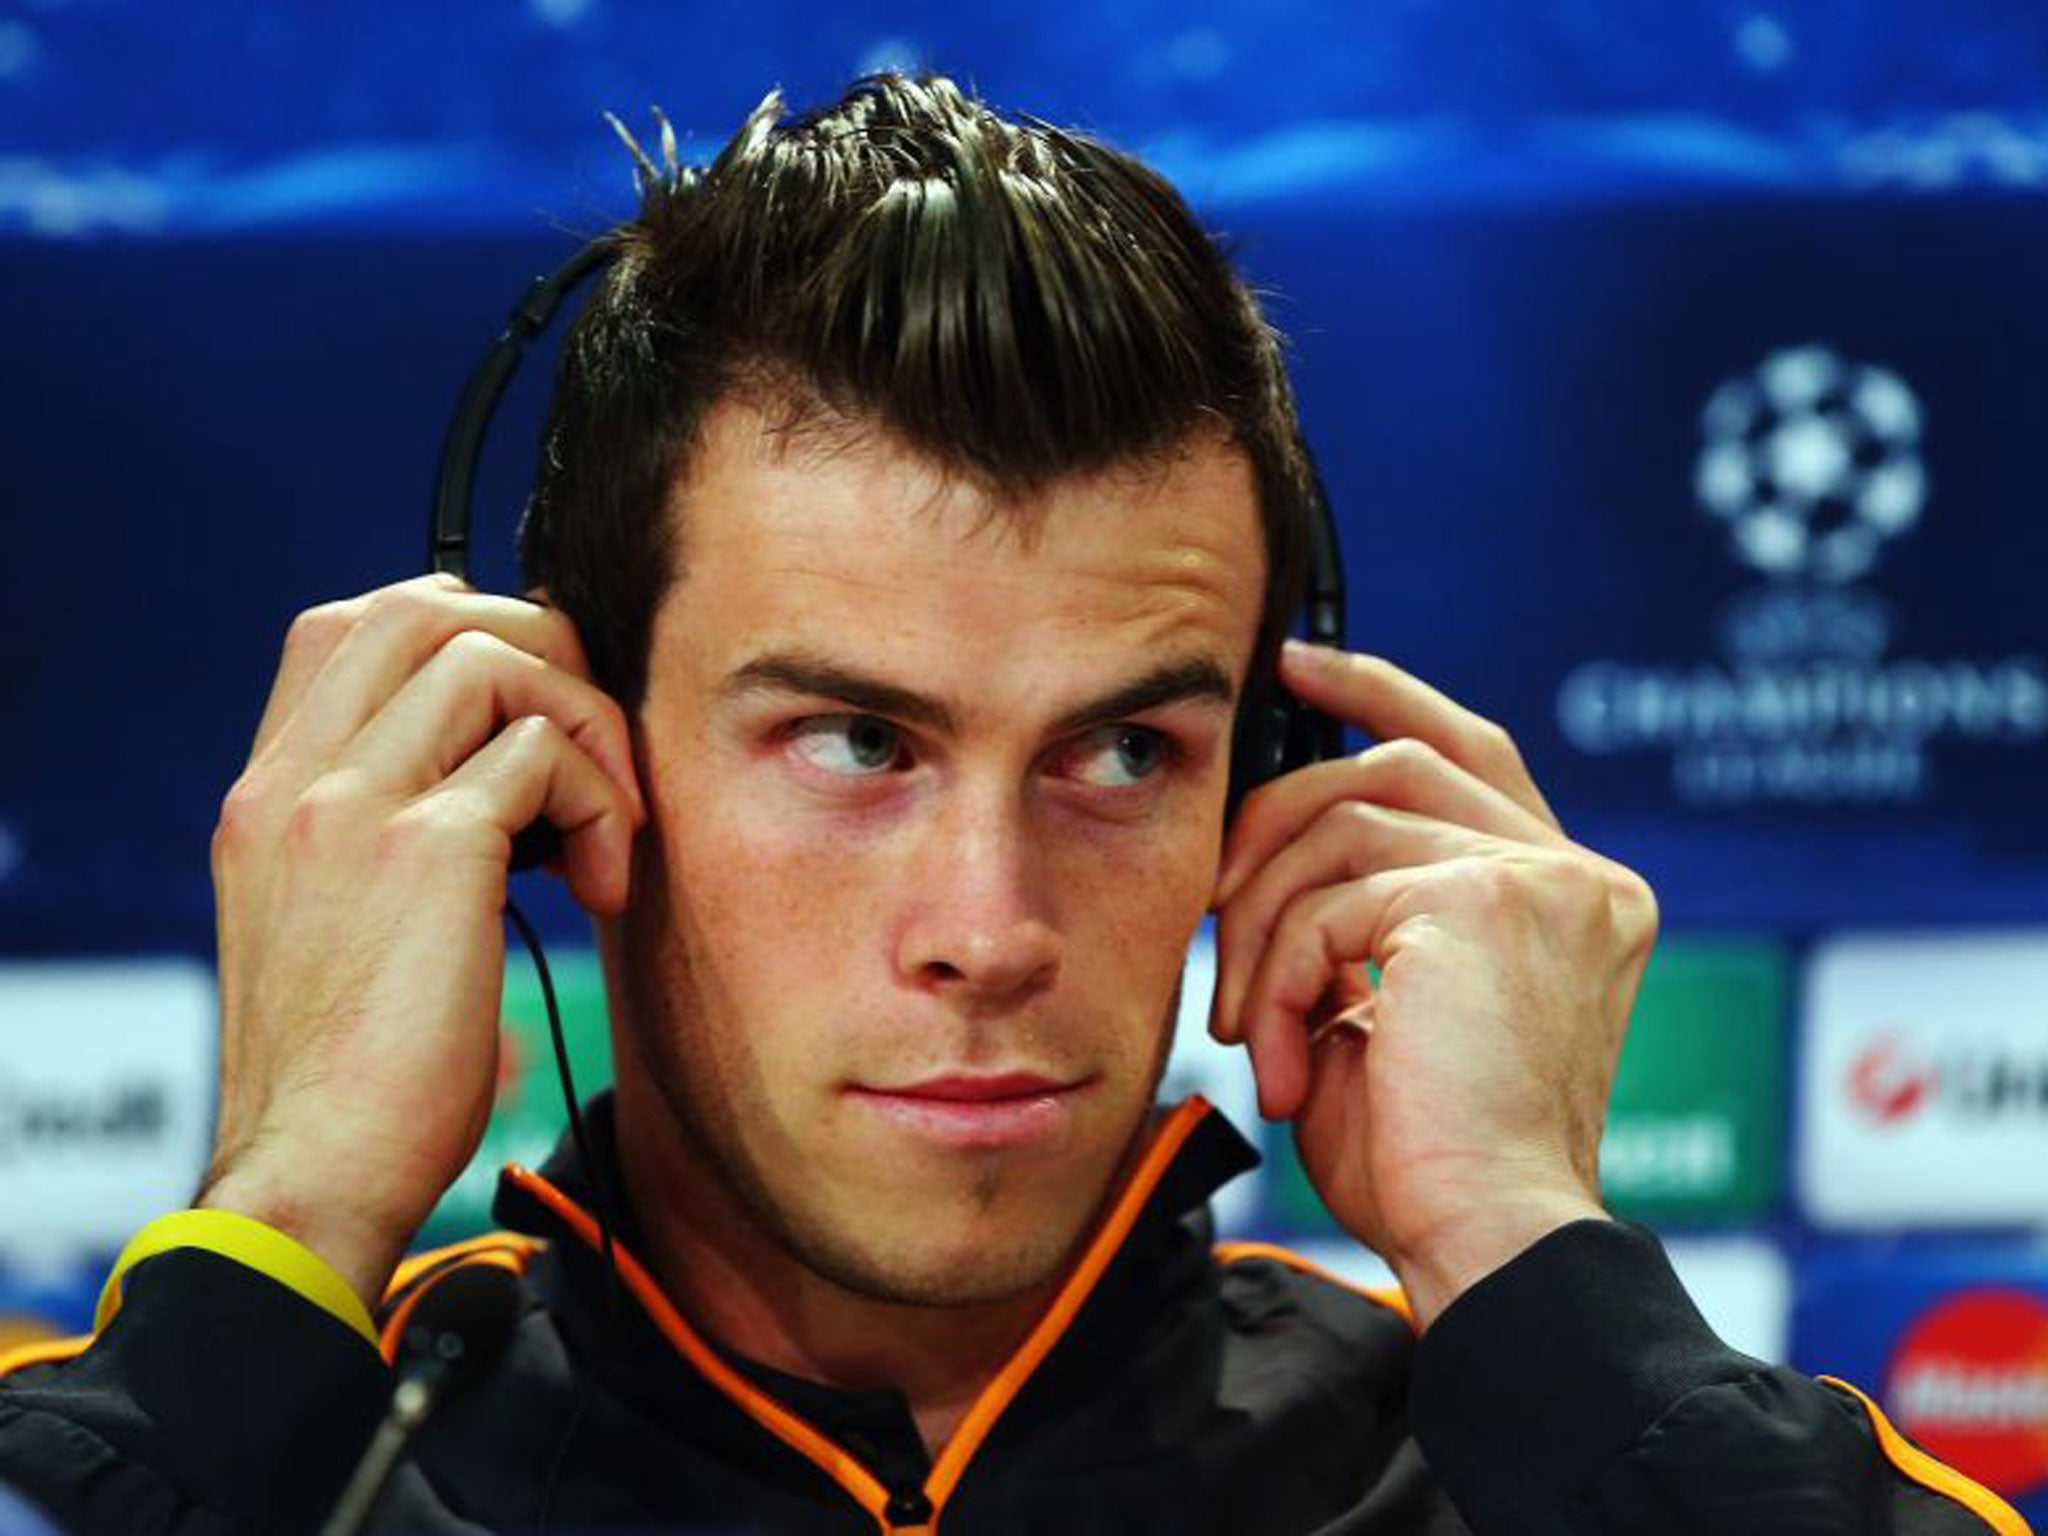 Real Madrid’s Gareth Bale keeps cool in front of the press at the Allianz Arena yesterday